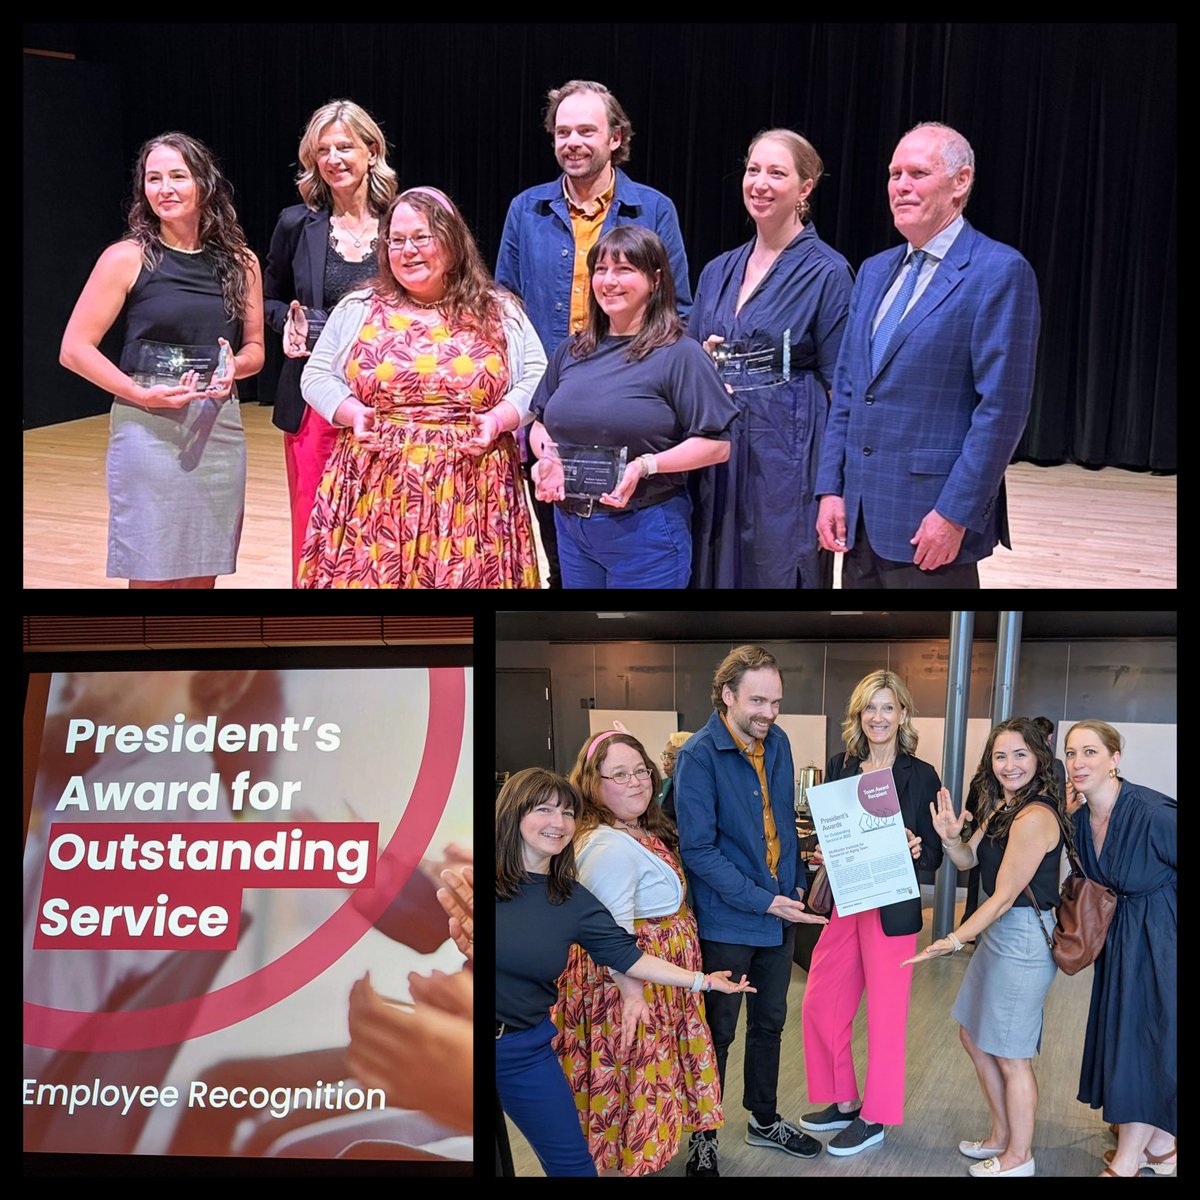 So very pleased for our wonderful @MIRAMcMaster team for receiving the @McMasterU 2023 President's Award for Outstanding Service. Shout out to @audreypatocs @Allisonmward @GesineAlders Alison Outtrim, @caseyirvin and Amy Ladouceur. Thank you for all you do!